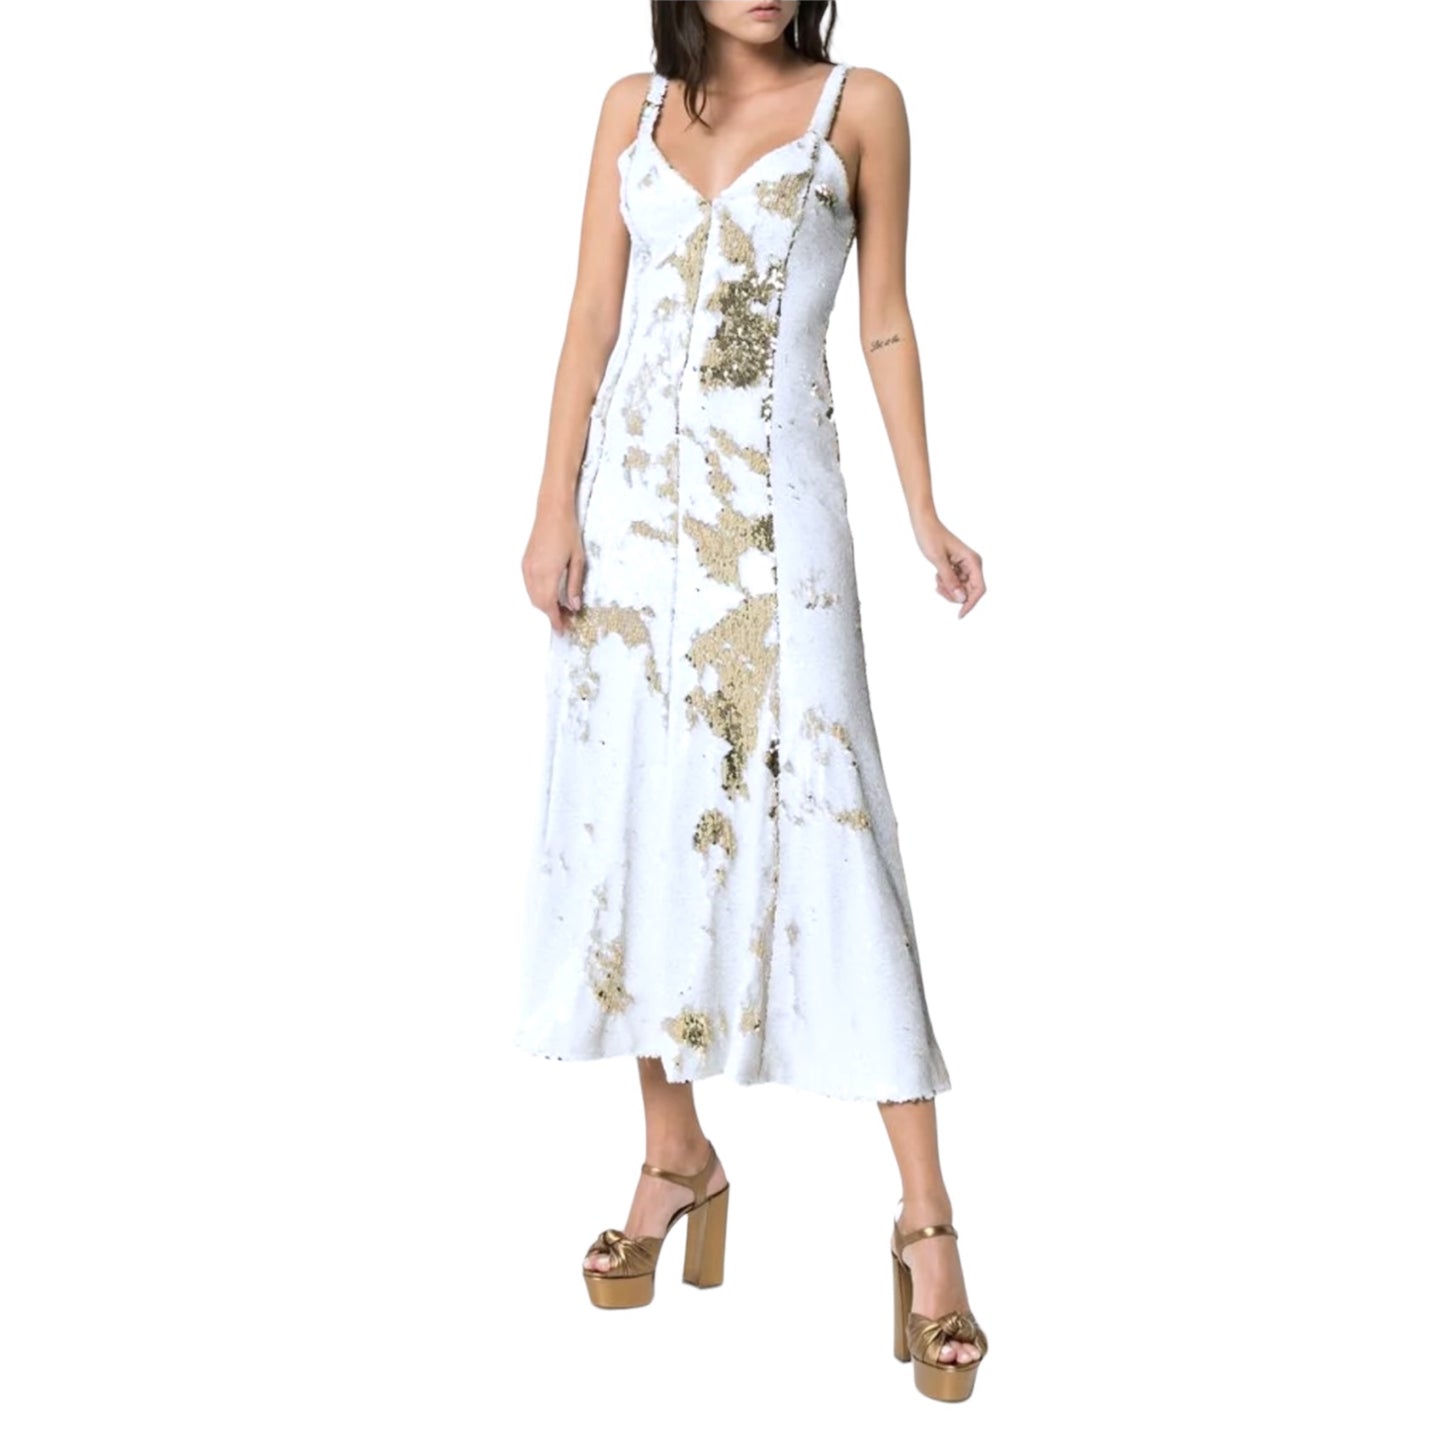 Racil White and Gold Sequin Dress - 8 - NEW